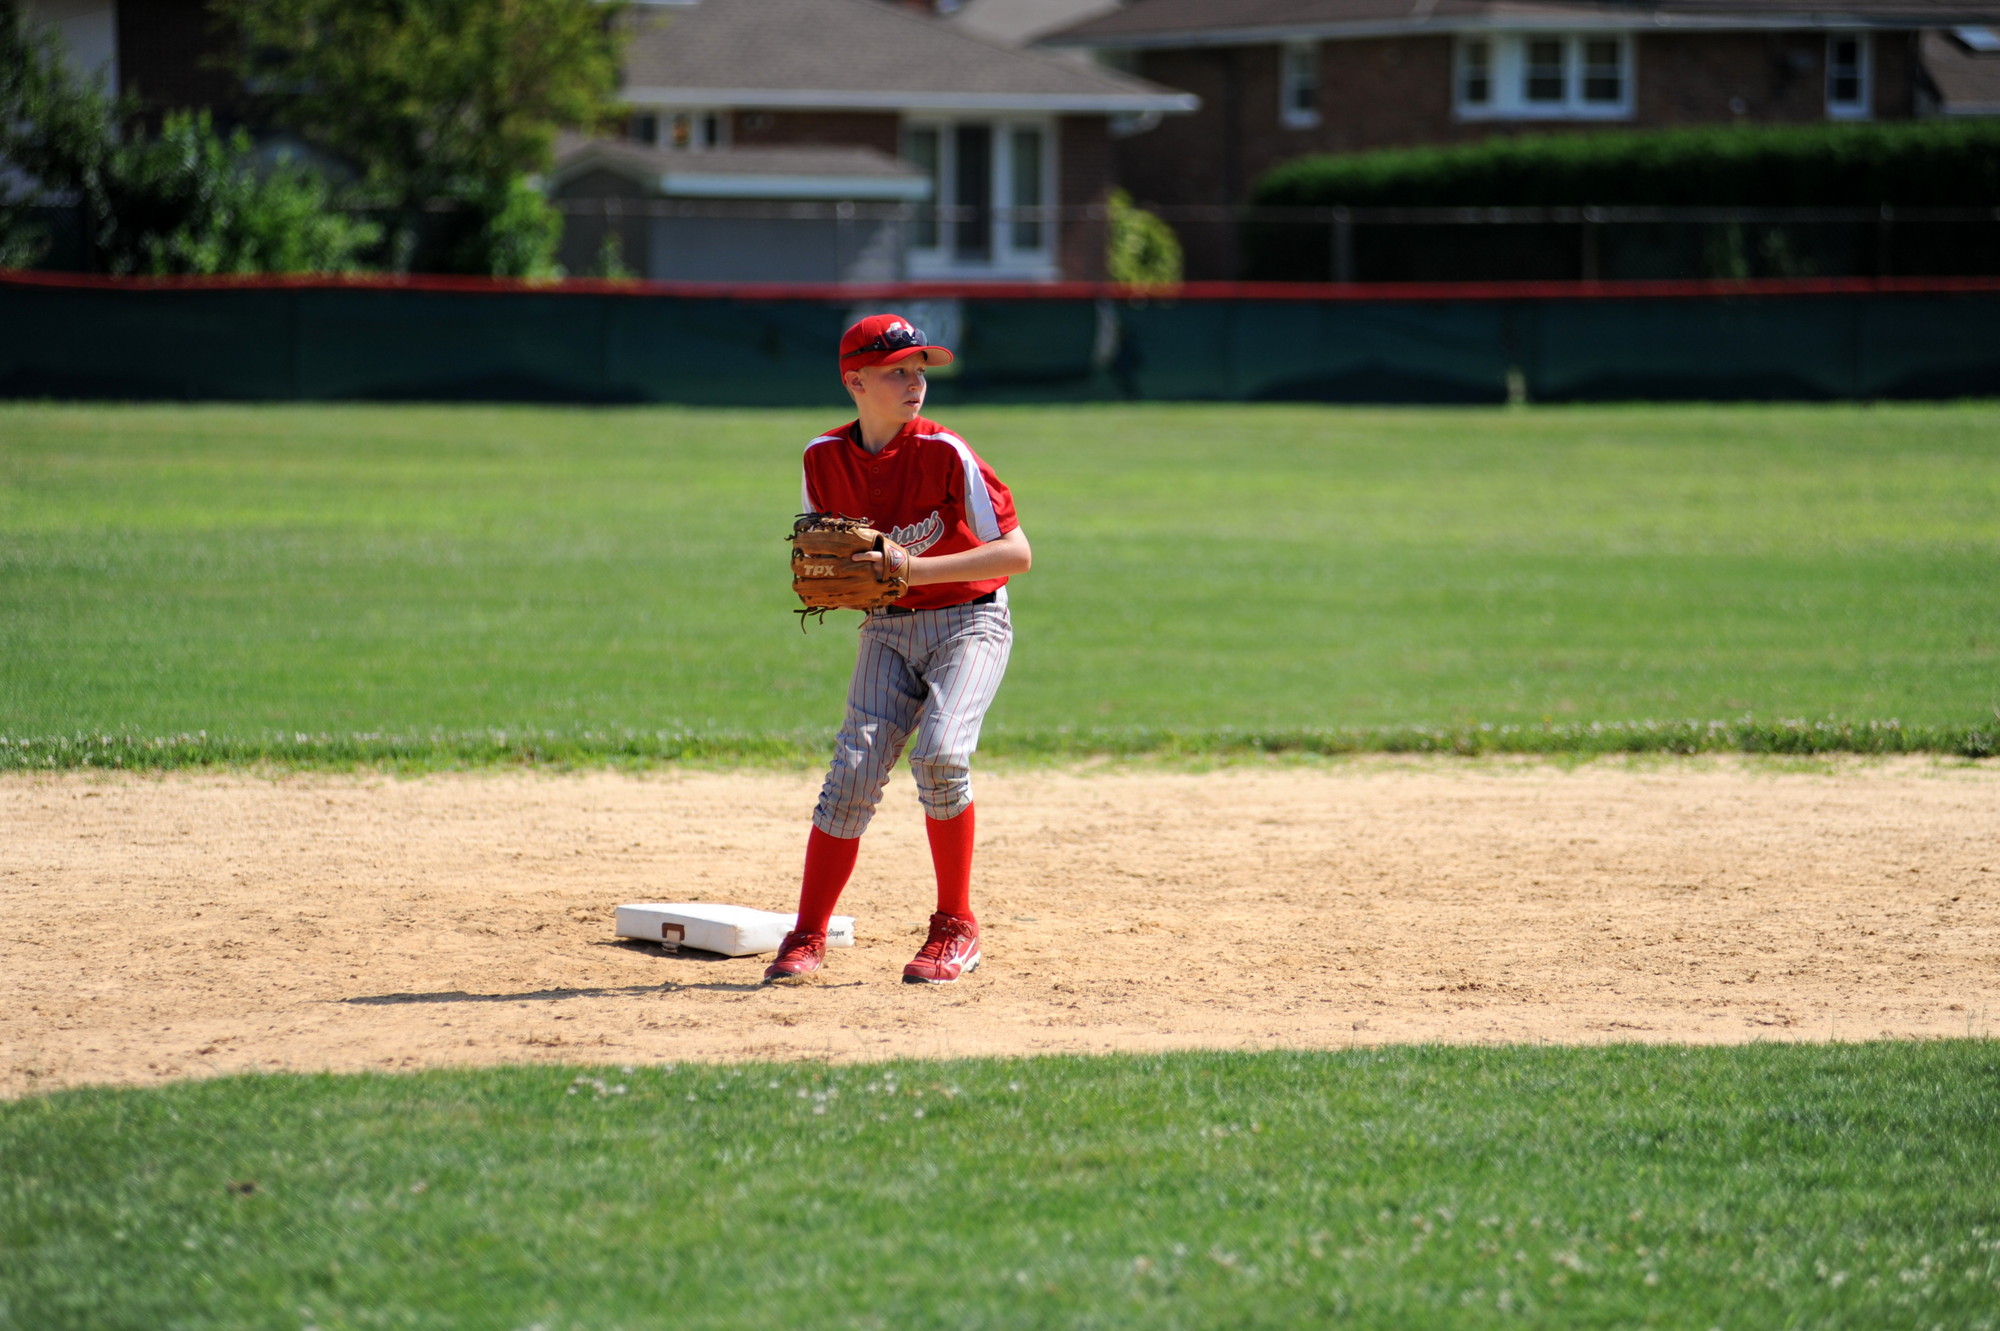 Brendan Turton fired a ball from shortstop during the baseball camp.